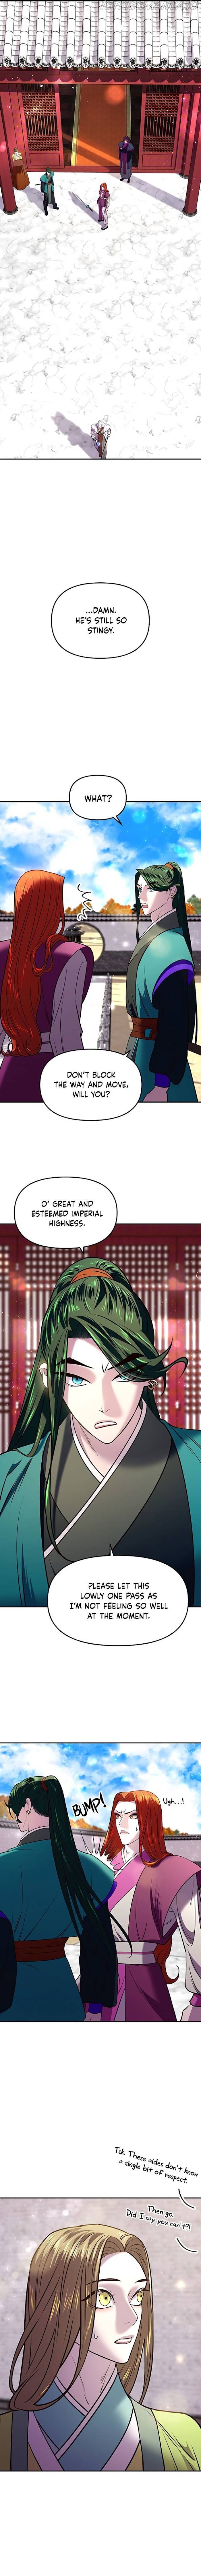 The Prince of Myolyeong Chapter 17 - Page 11